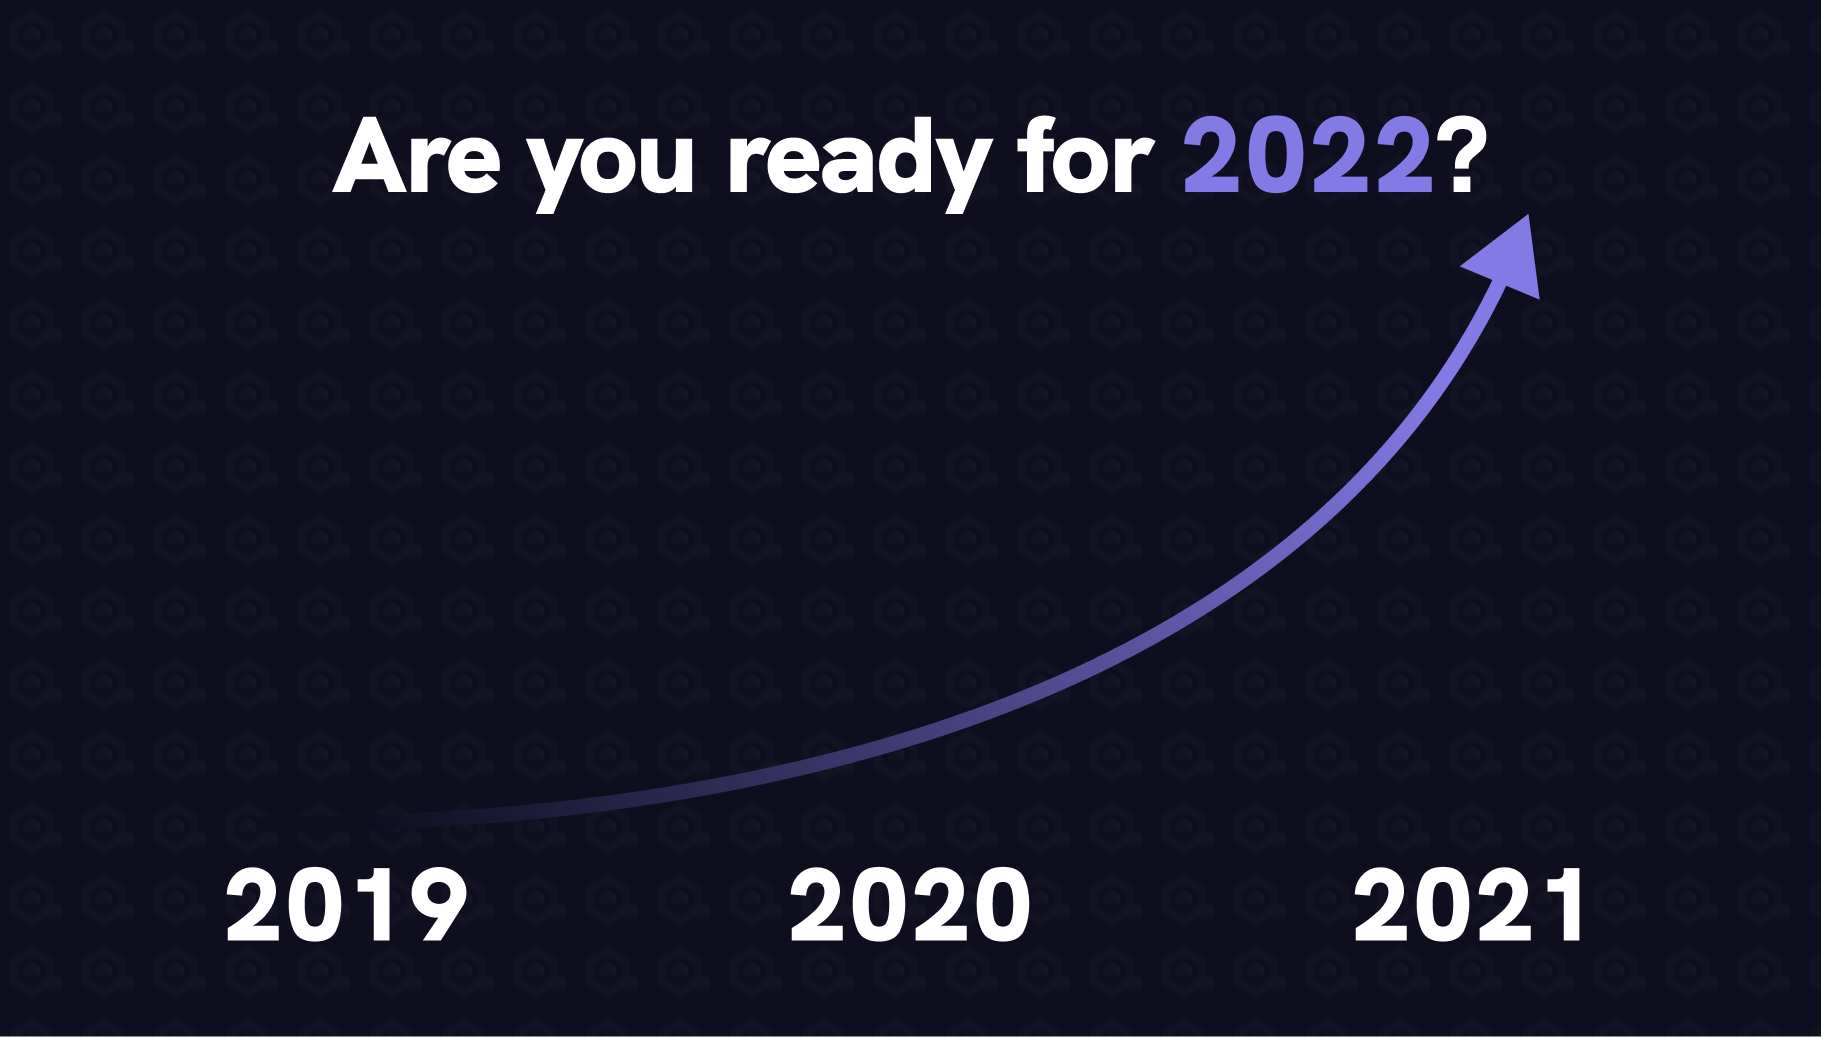 Are you ready for 2022?